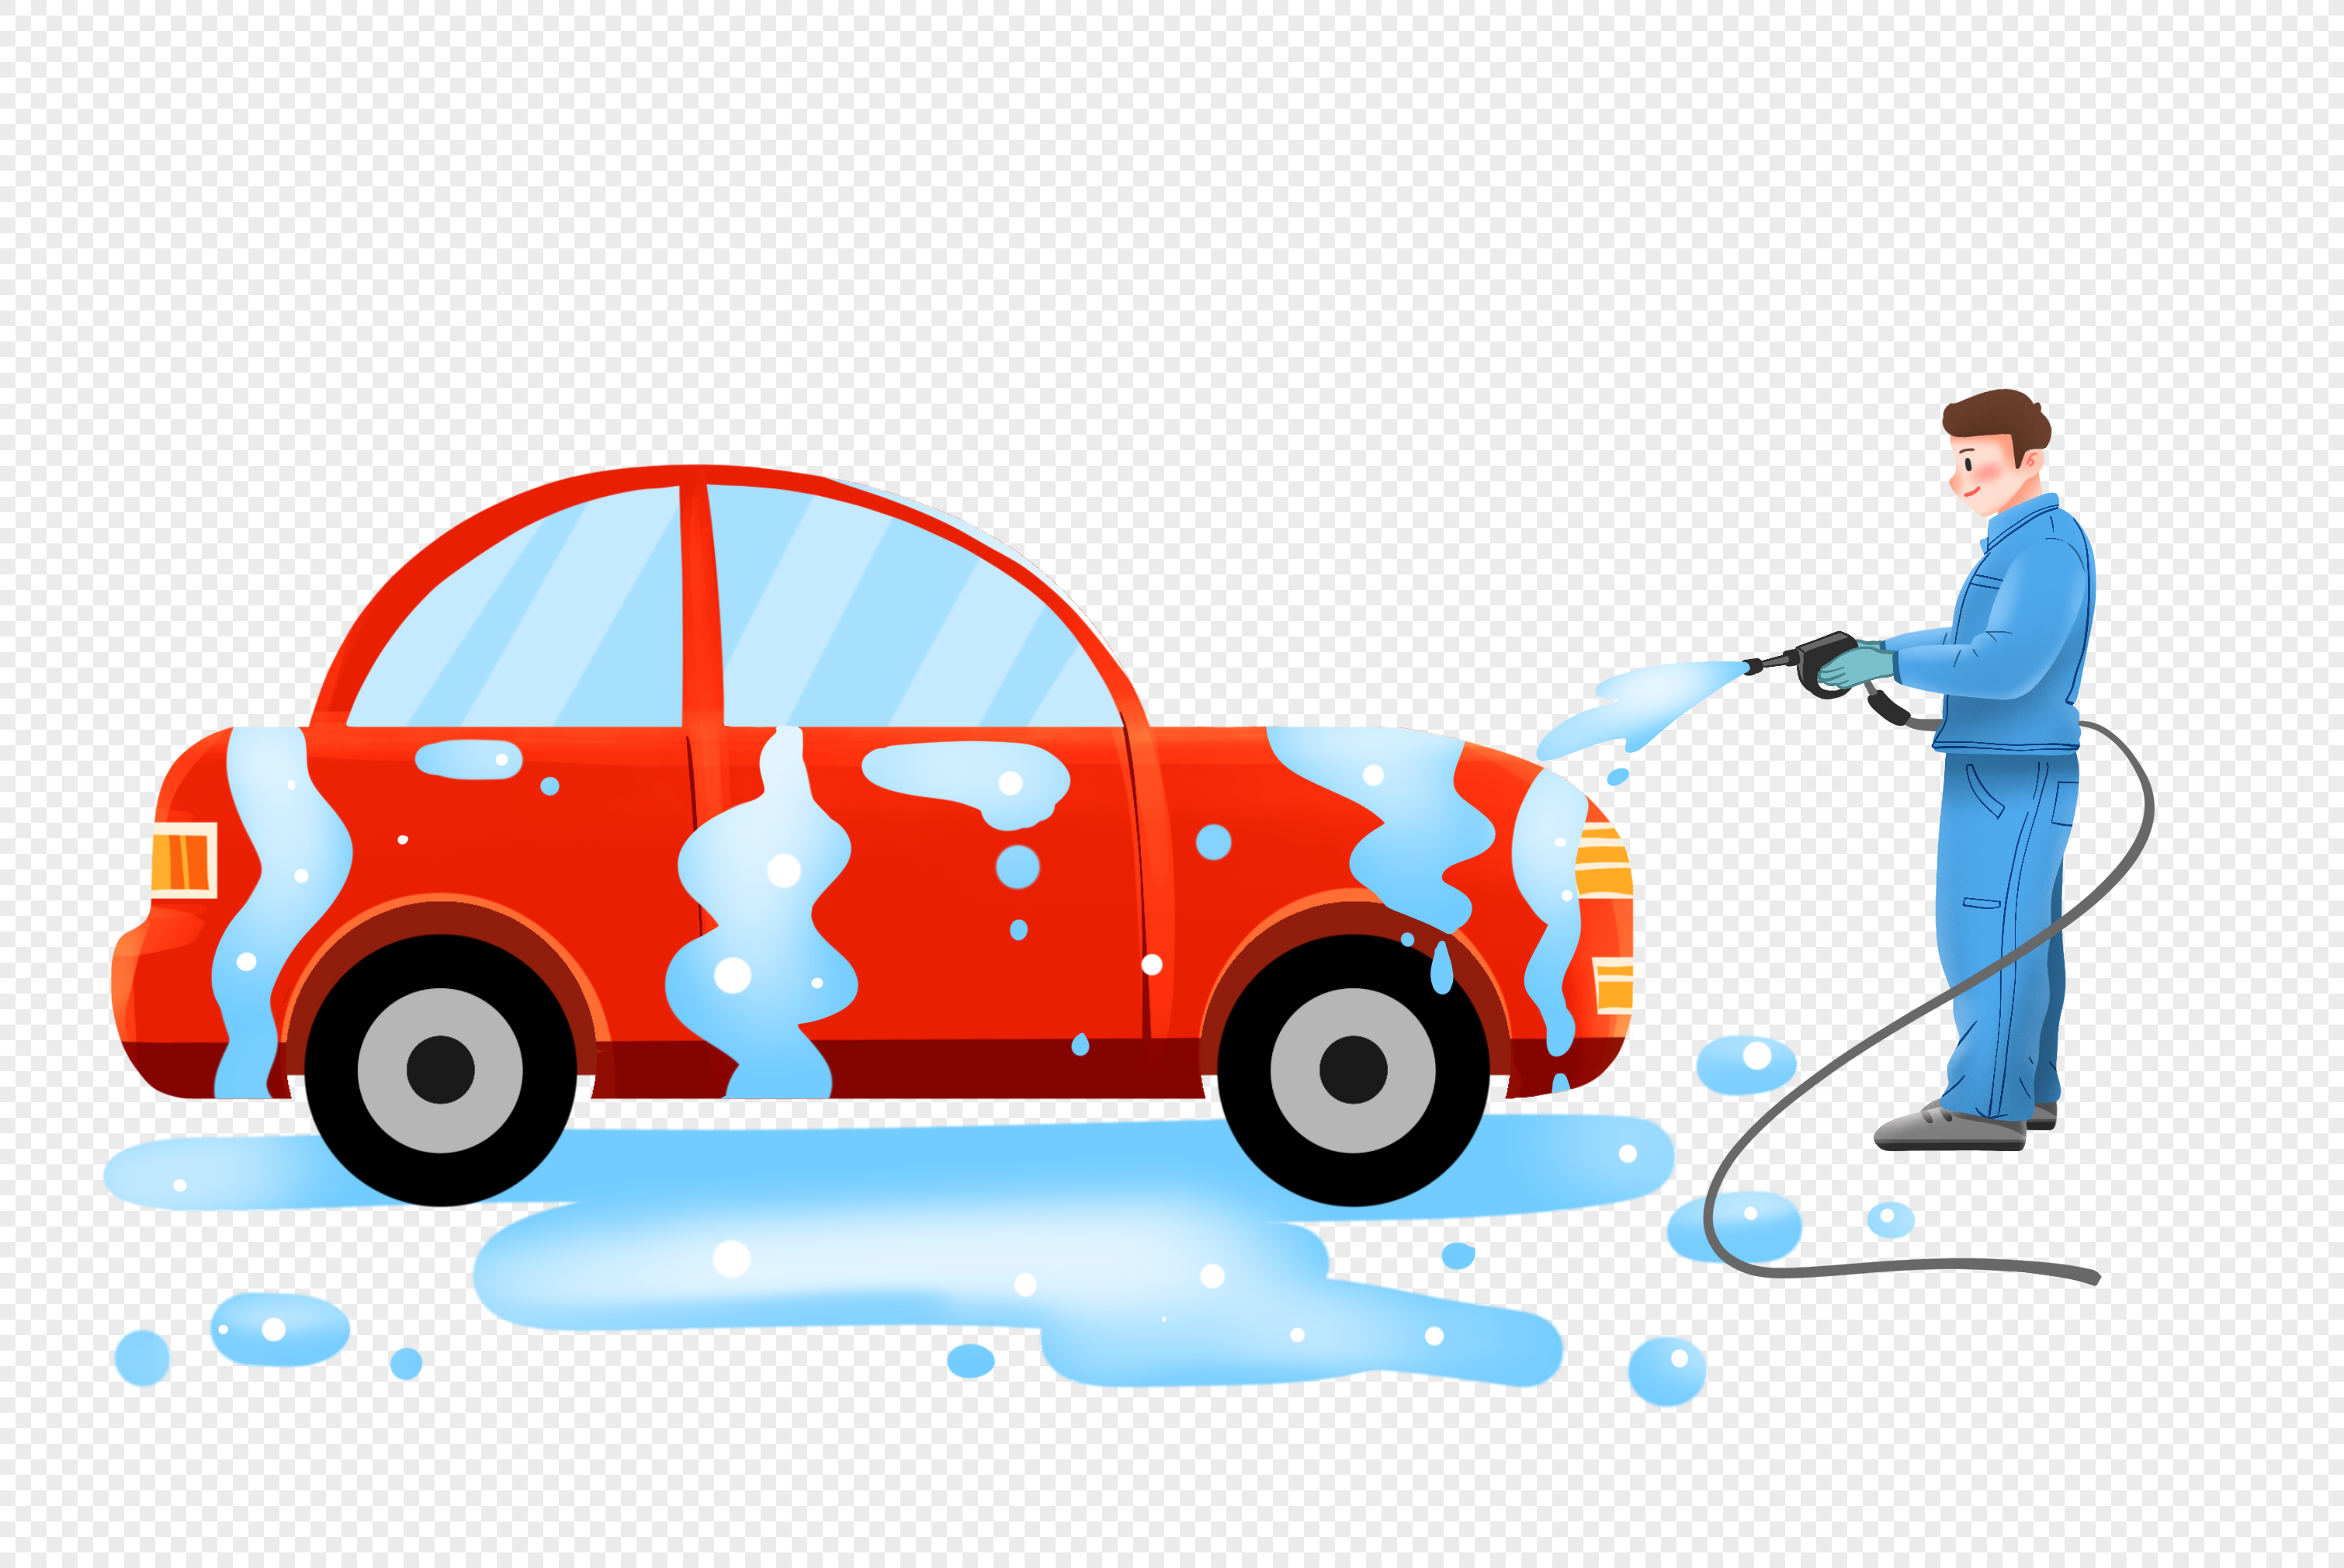 Car wash workers are cleaning the car with a water gun, worker, car, car wash png image free download